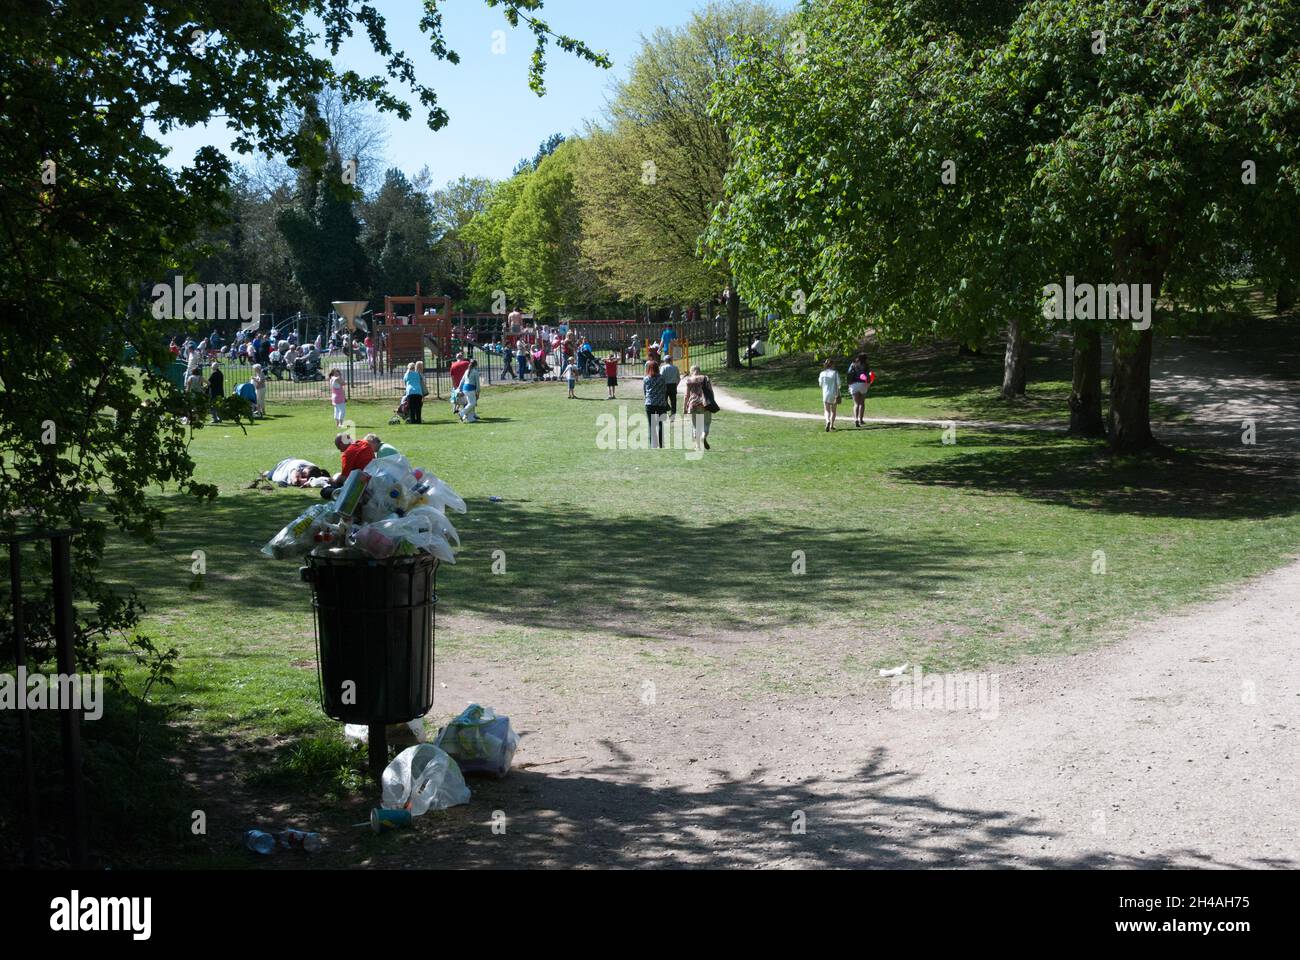 Overflowing Public Rubbish Bin at a Park, People at a Park Stock Photo